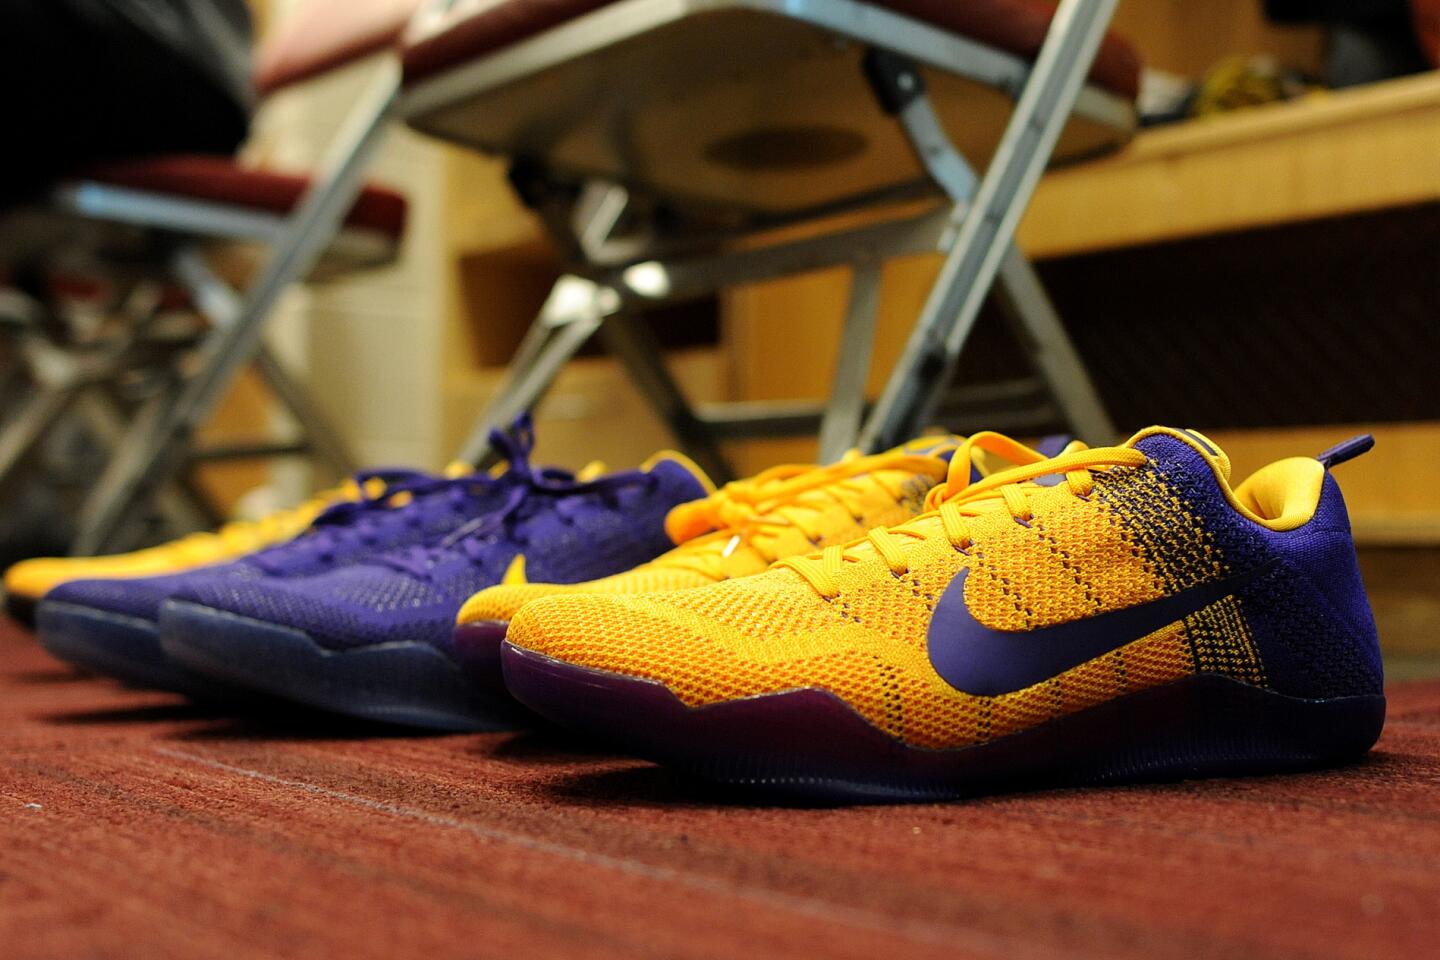 Kobe Bryant's shoes sit in front of his locker before a game against the Rockets in Houston.